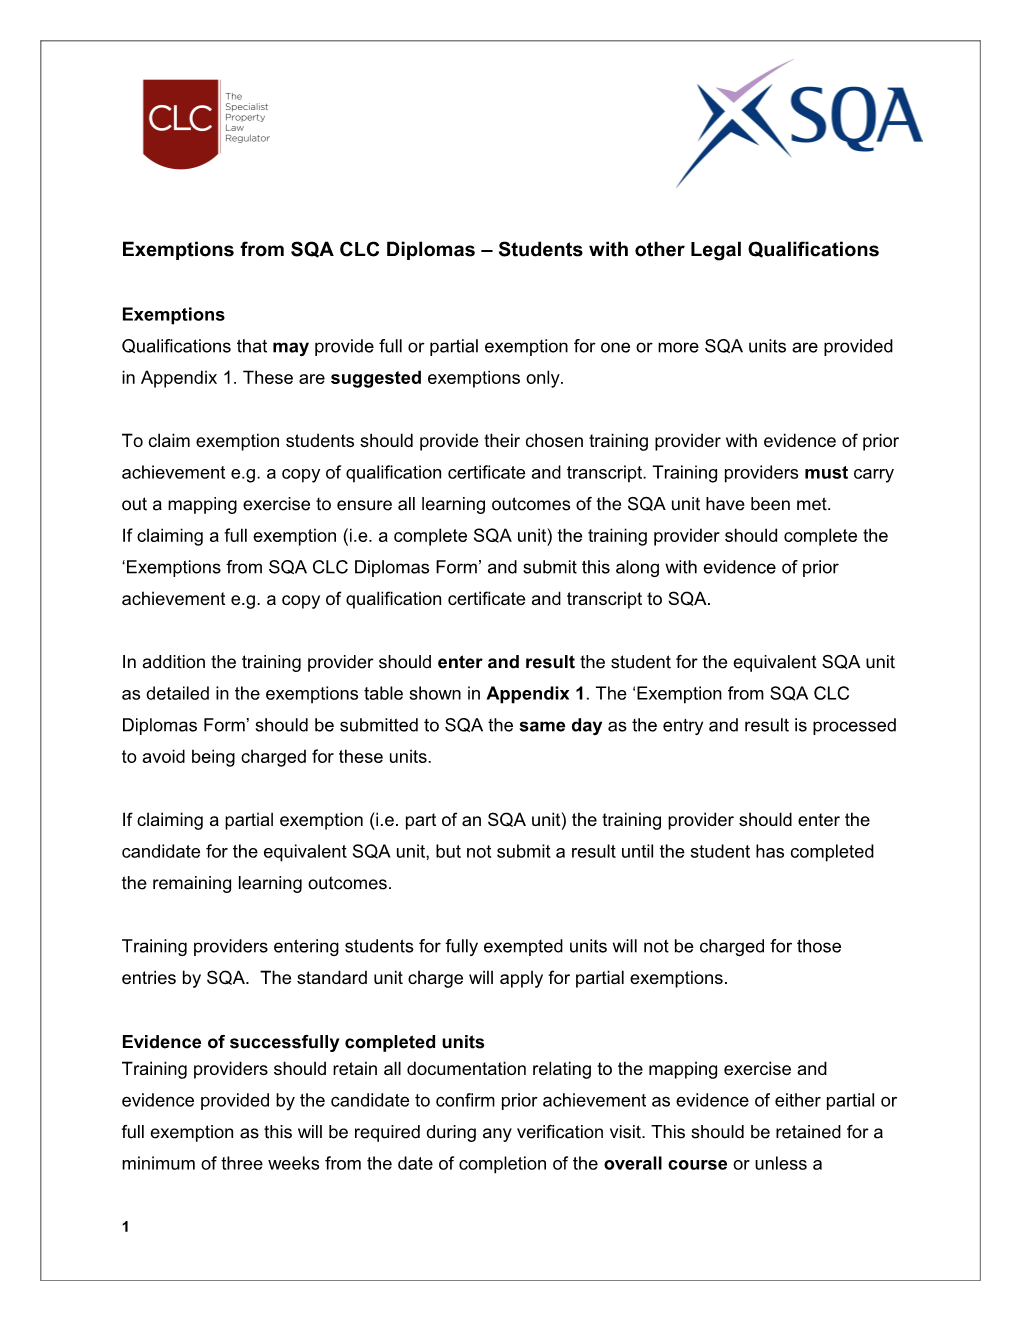 Exemptions from SQA CLC Diplomas Students with Other Legal Qualifications